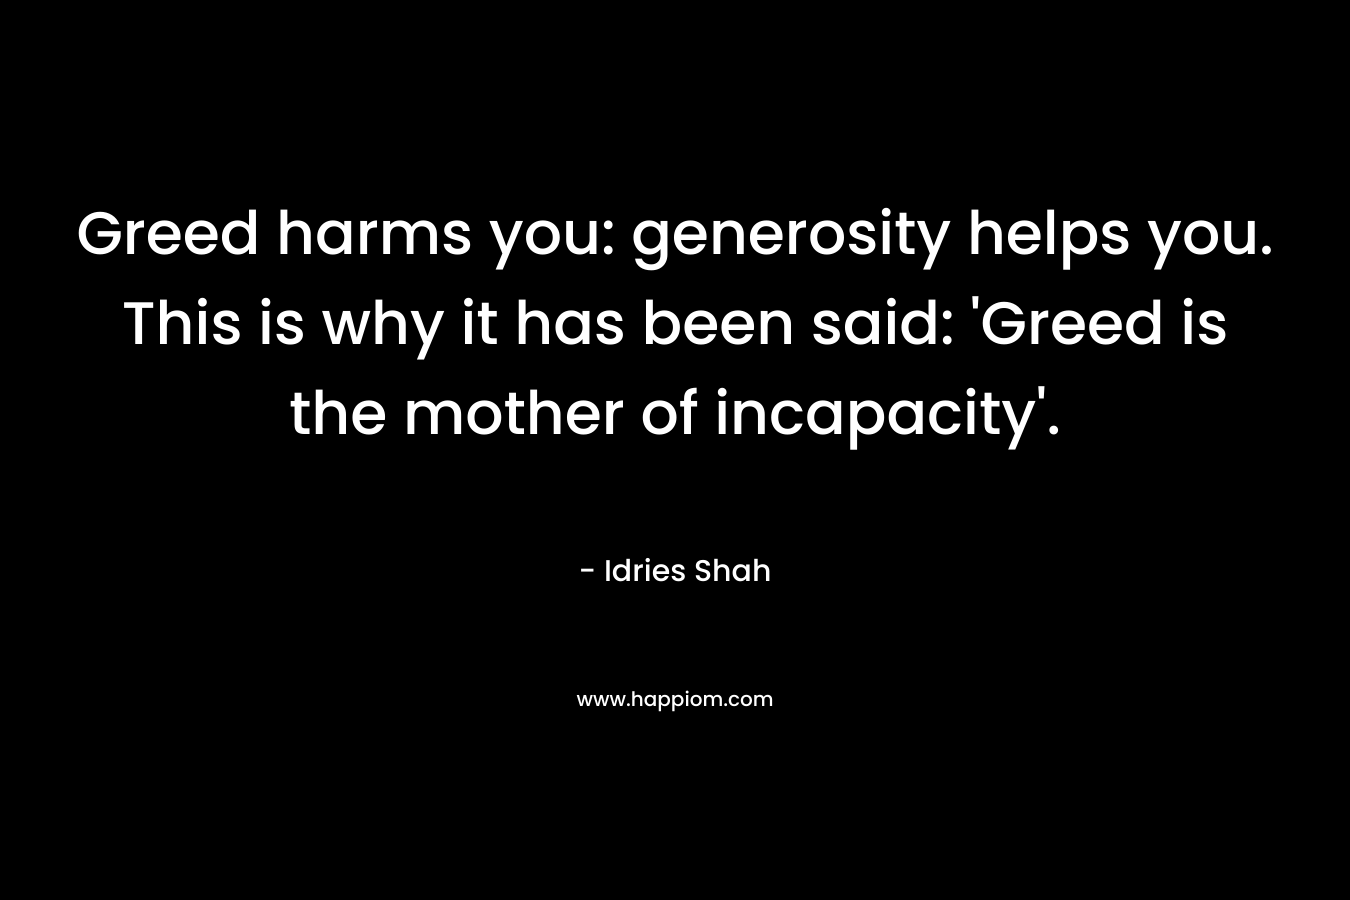 Greed harms you: generosity helps you. This is why it has been said: 'Greed is the mother of incapacity'.